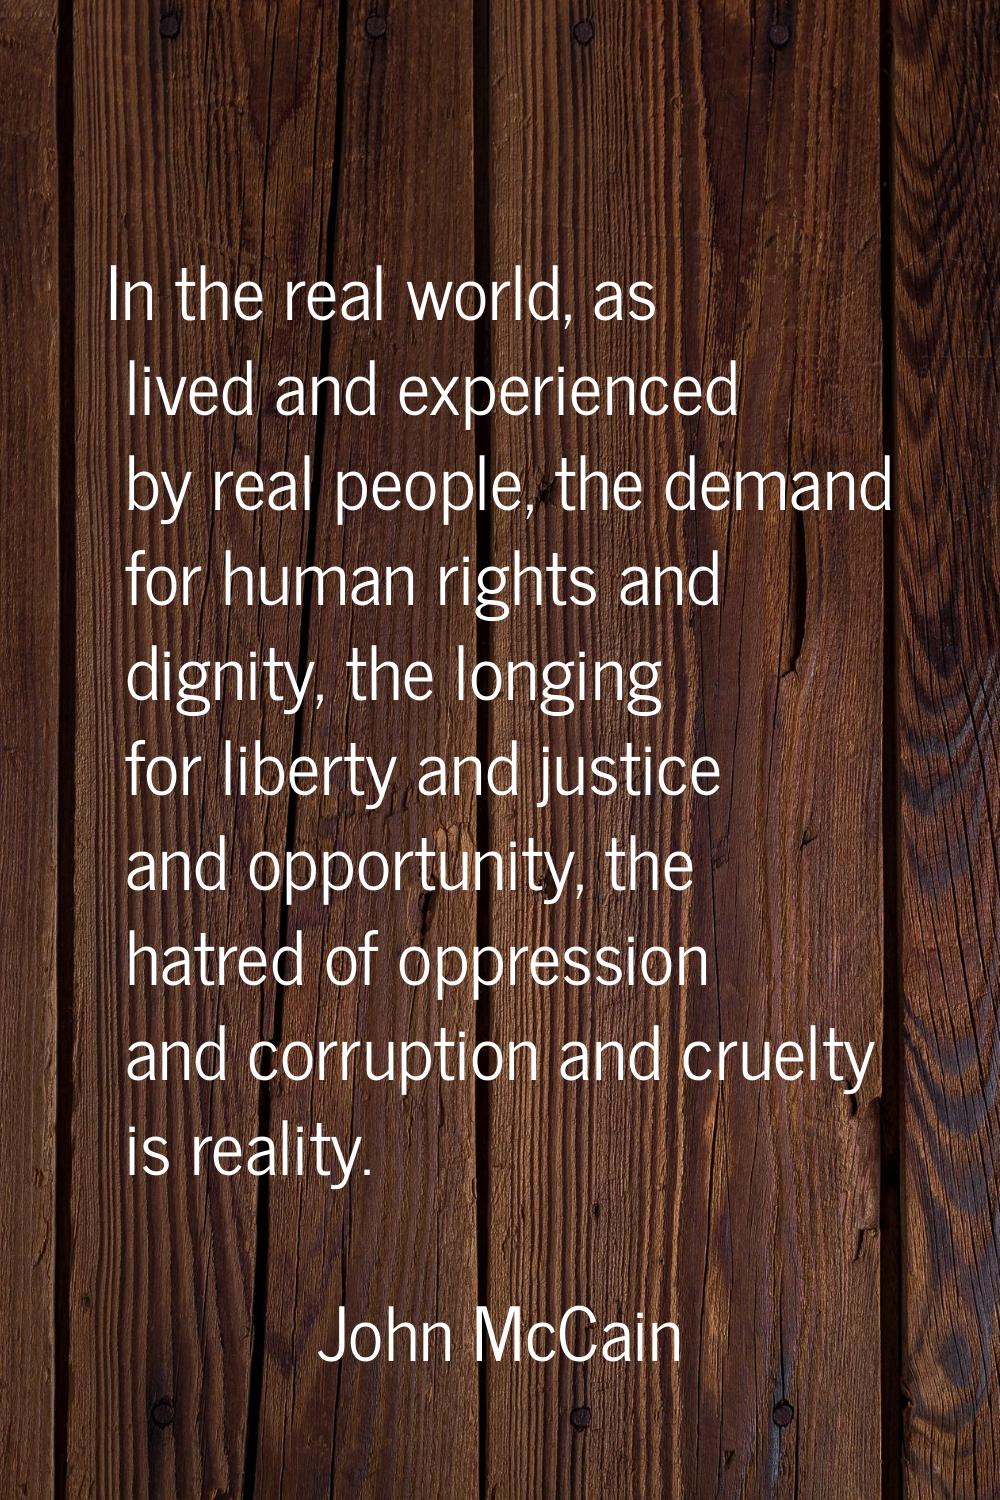 In the real world, as lived and experienced by real people, the demand for human rights and dignity